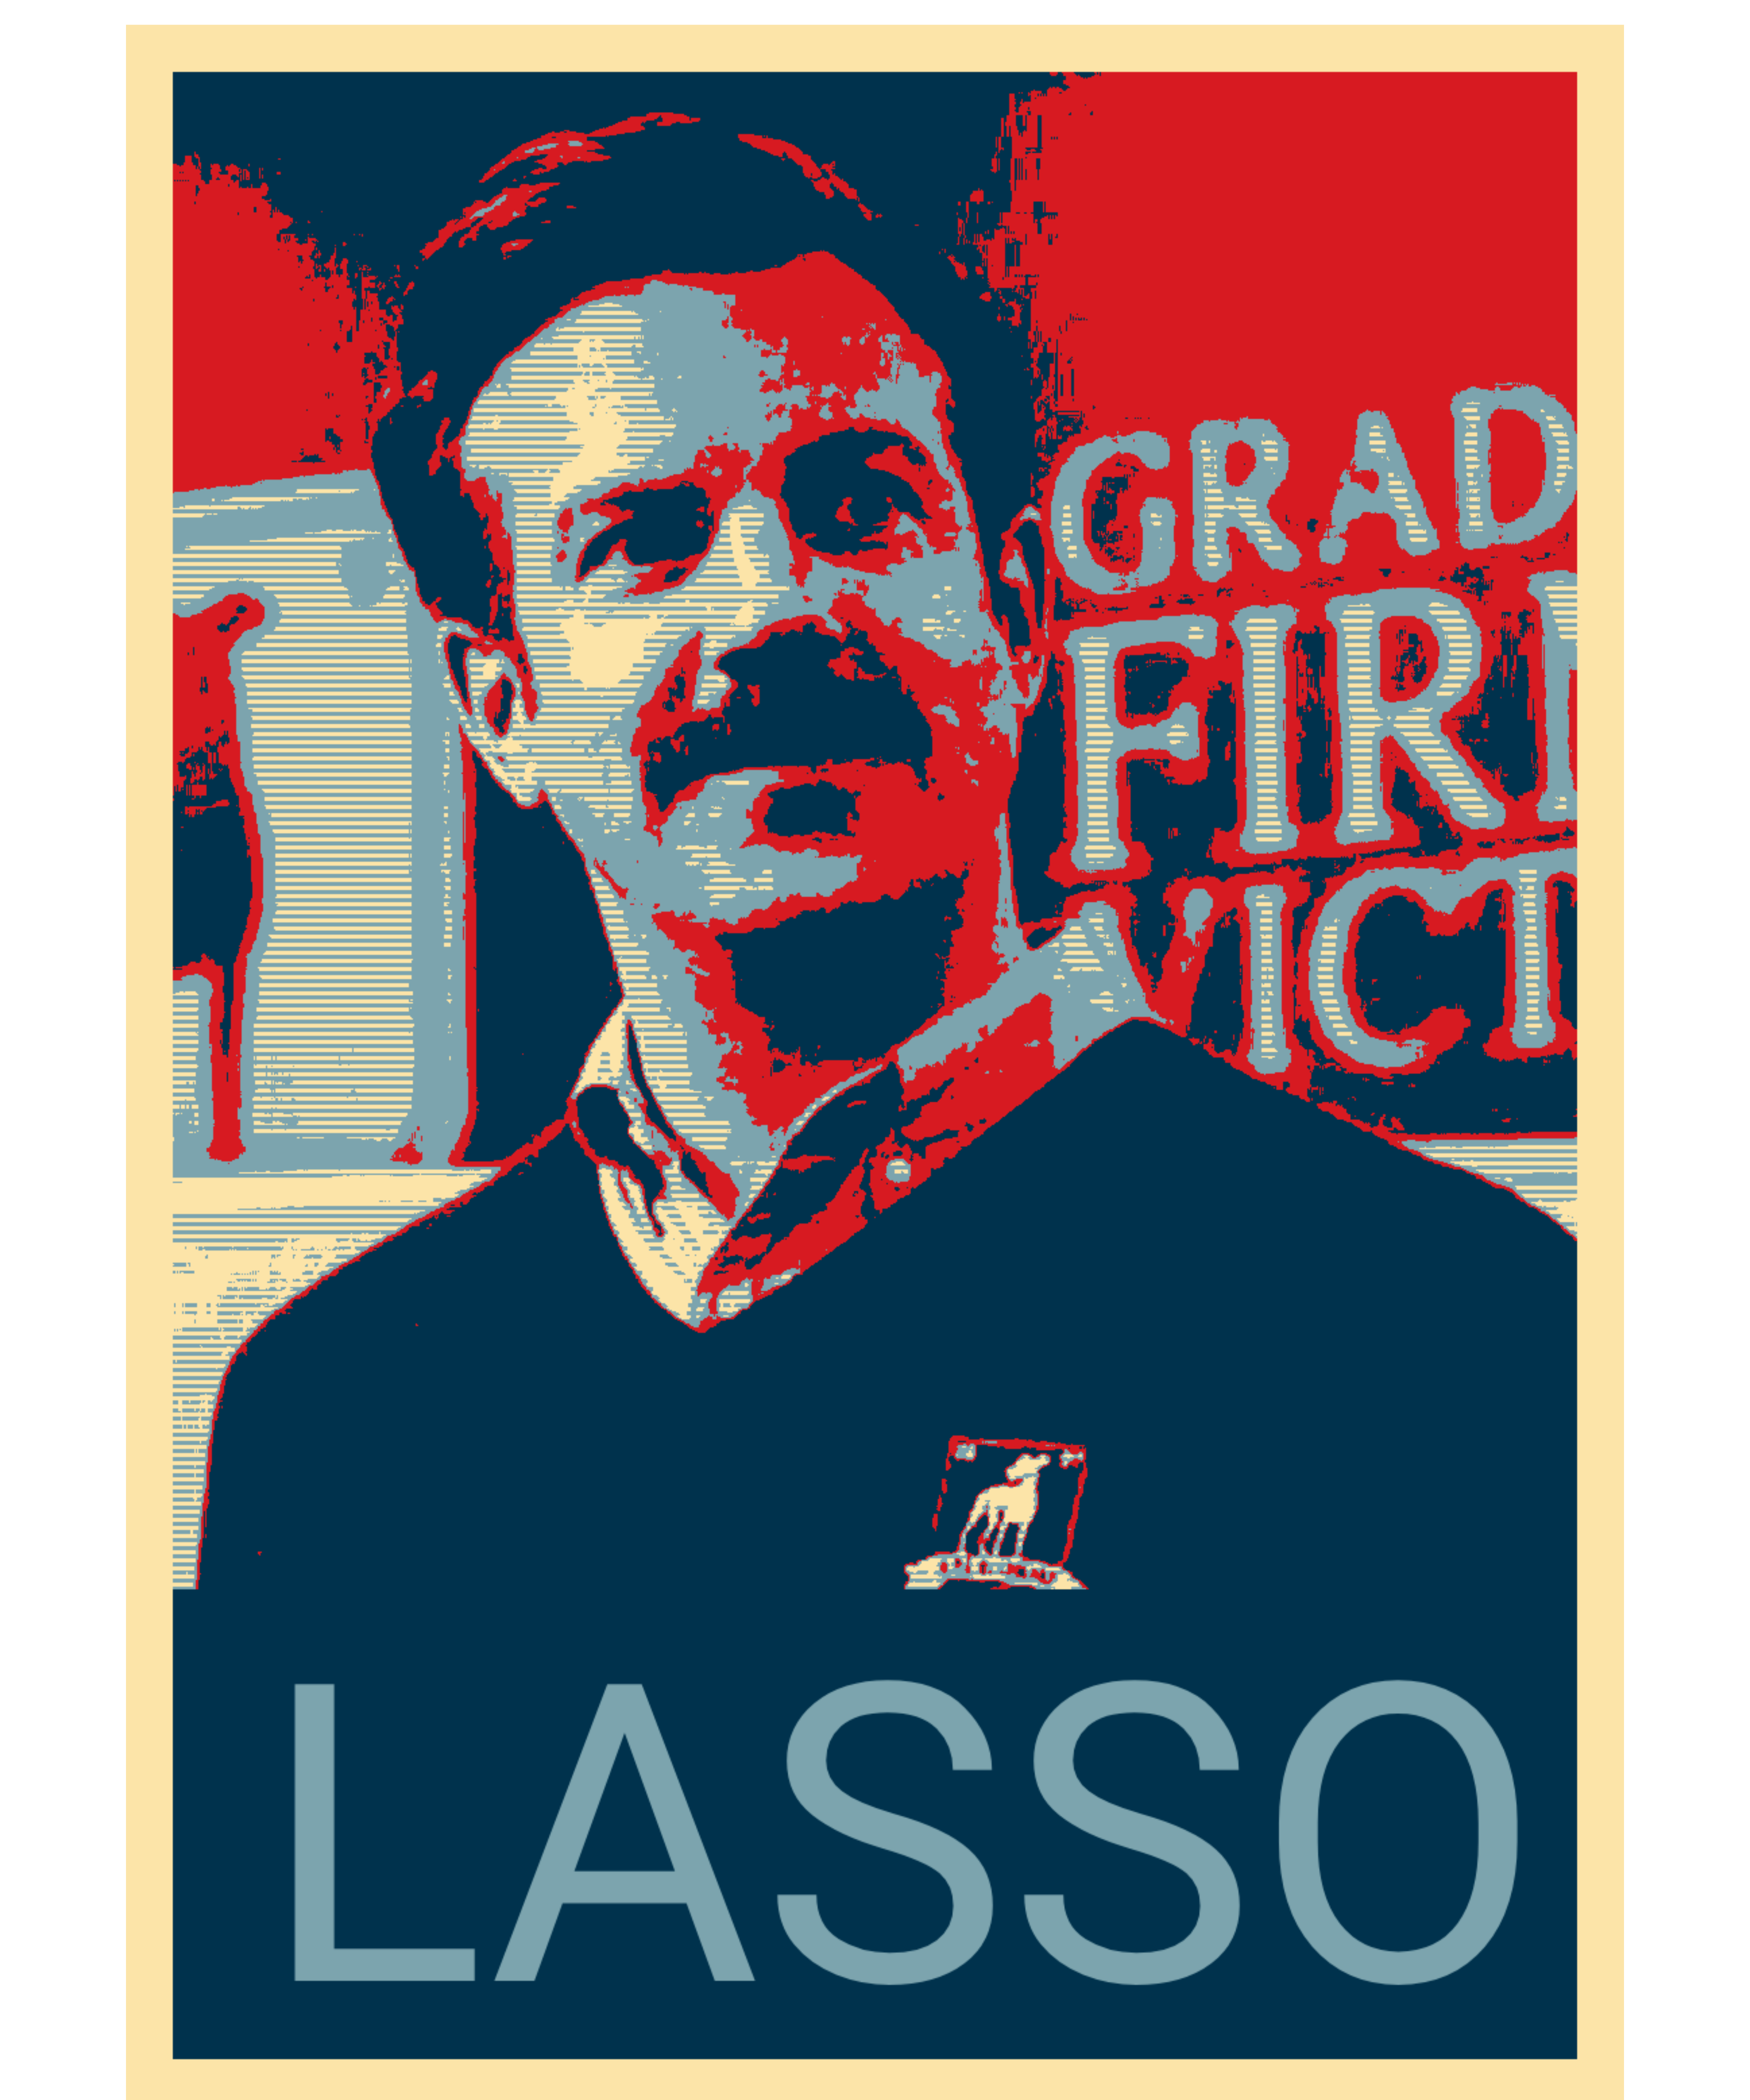 Celebrate the debut of Ted Lasso season 2 later this week with these iPhone  wallpapers  9to5Mac